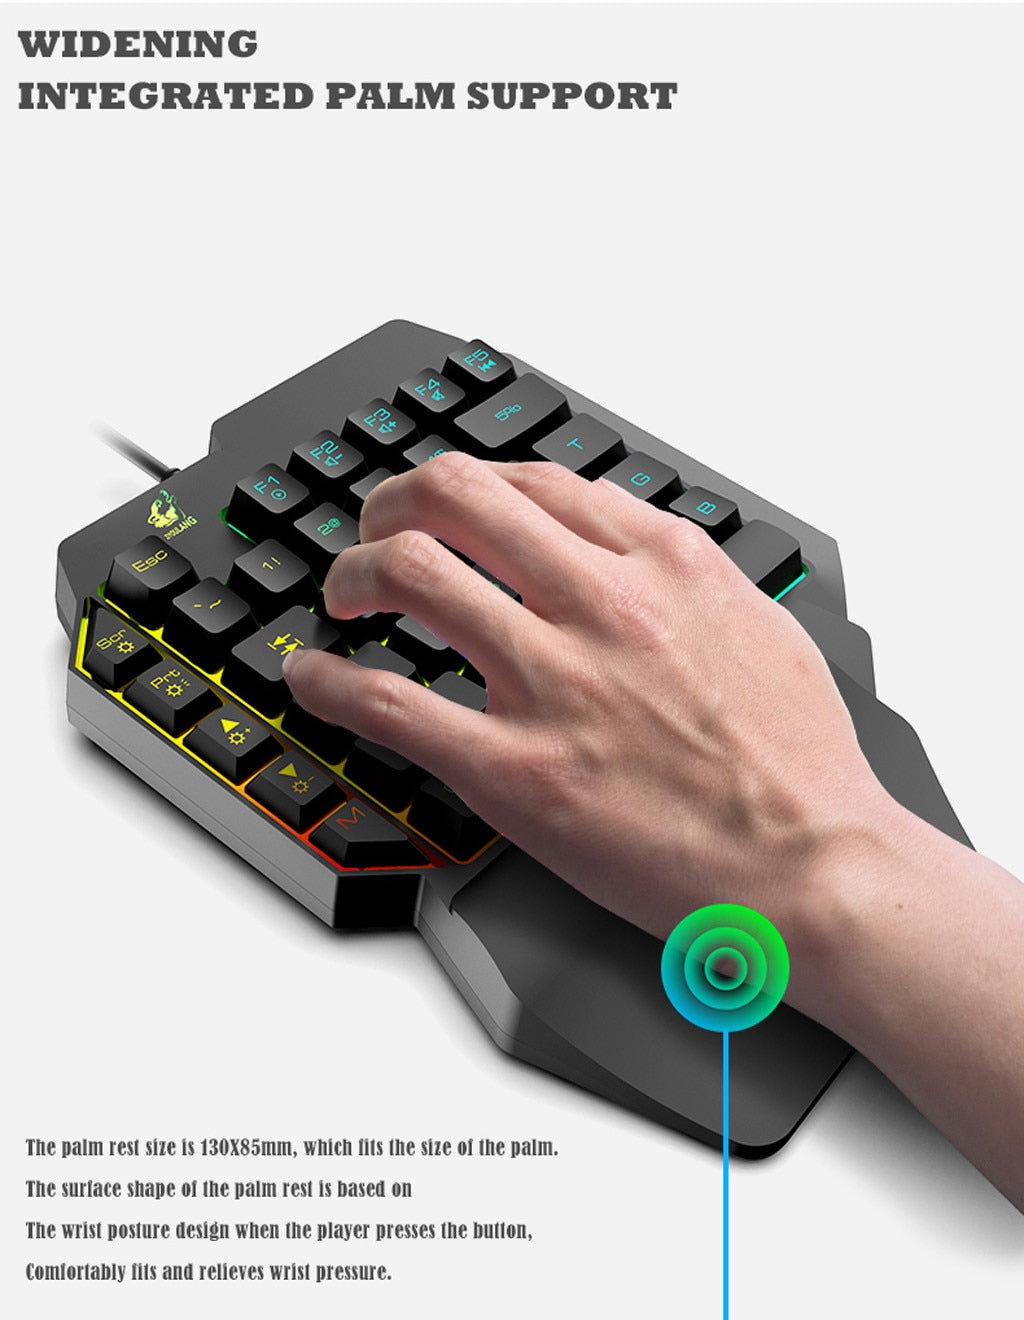 Pro Gaming Keypad w/ wire connection compatible with Phone docking, Tablets docking and PC is a tool many phone and computer gamers loves to use. Faster responsive moves that allows you to take the control in the game in a much safer and better way.